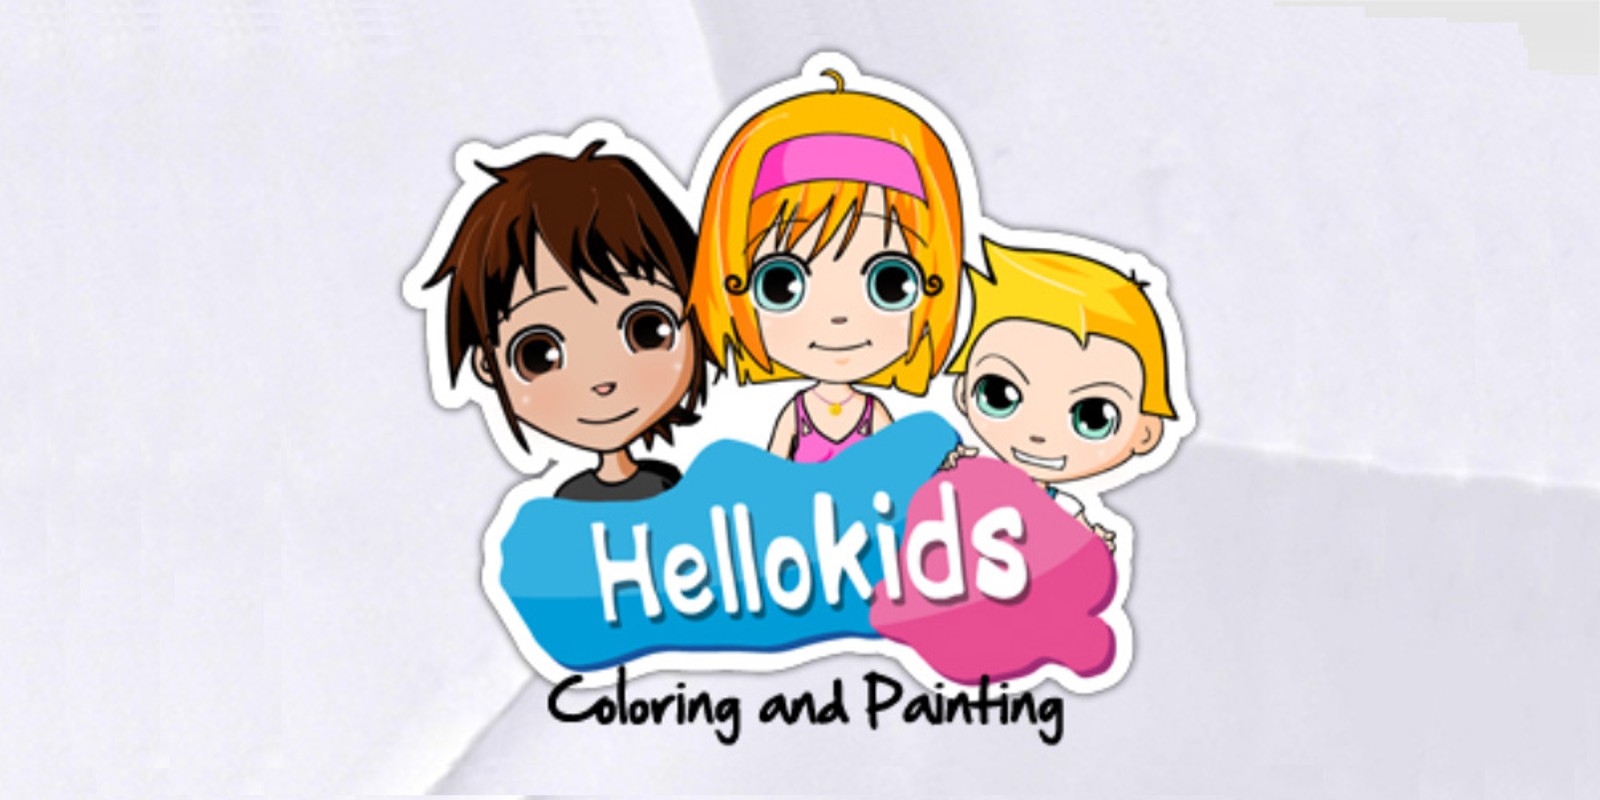 Hellokids - Vol. 1 Coloring and Painting